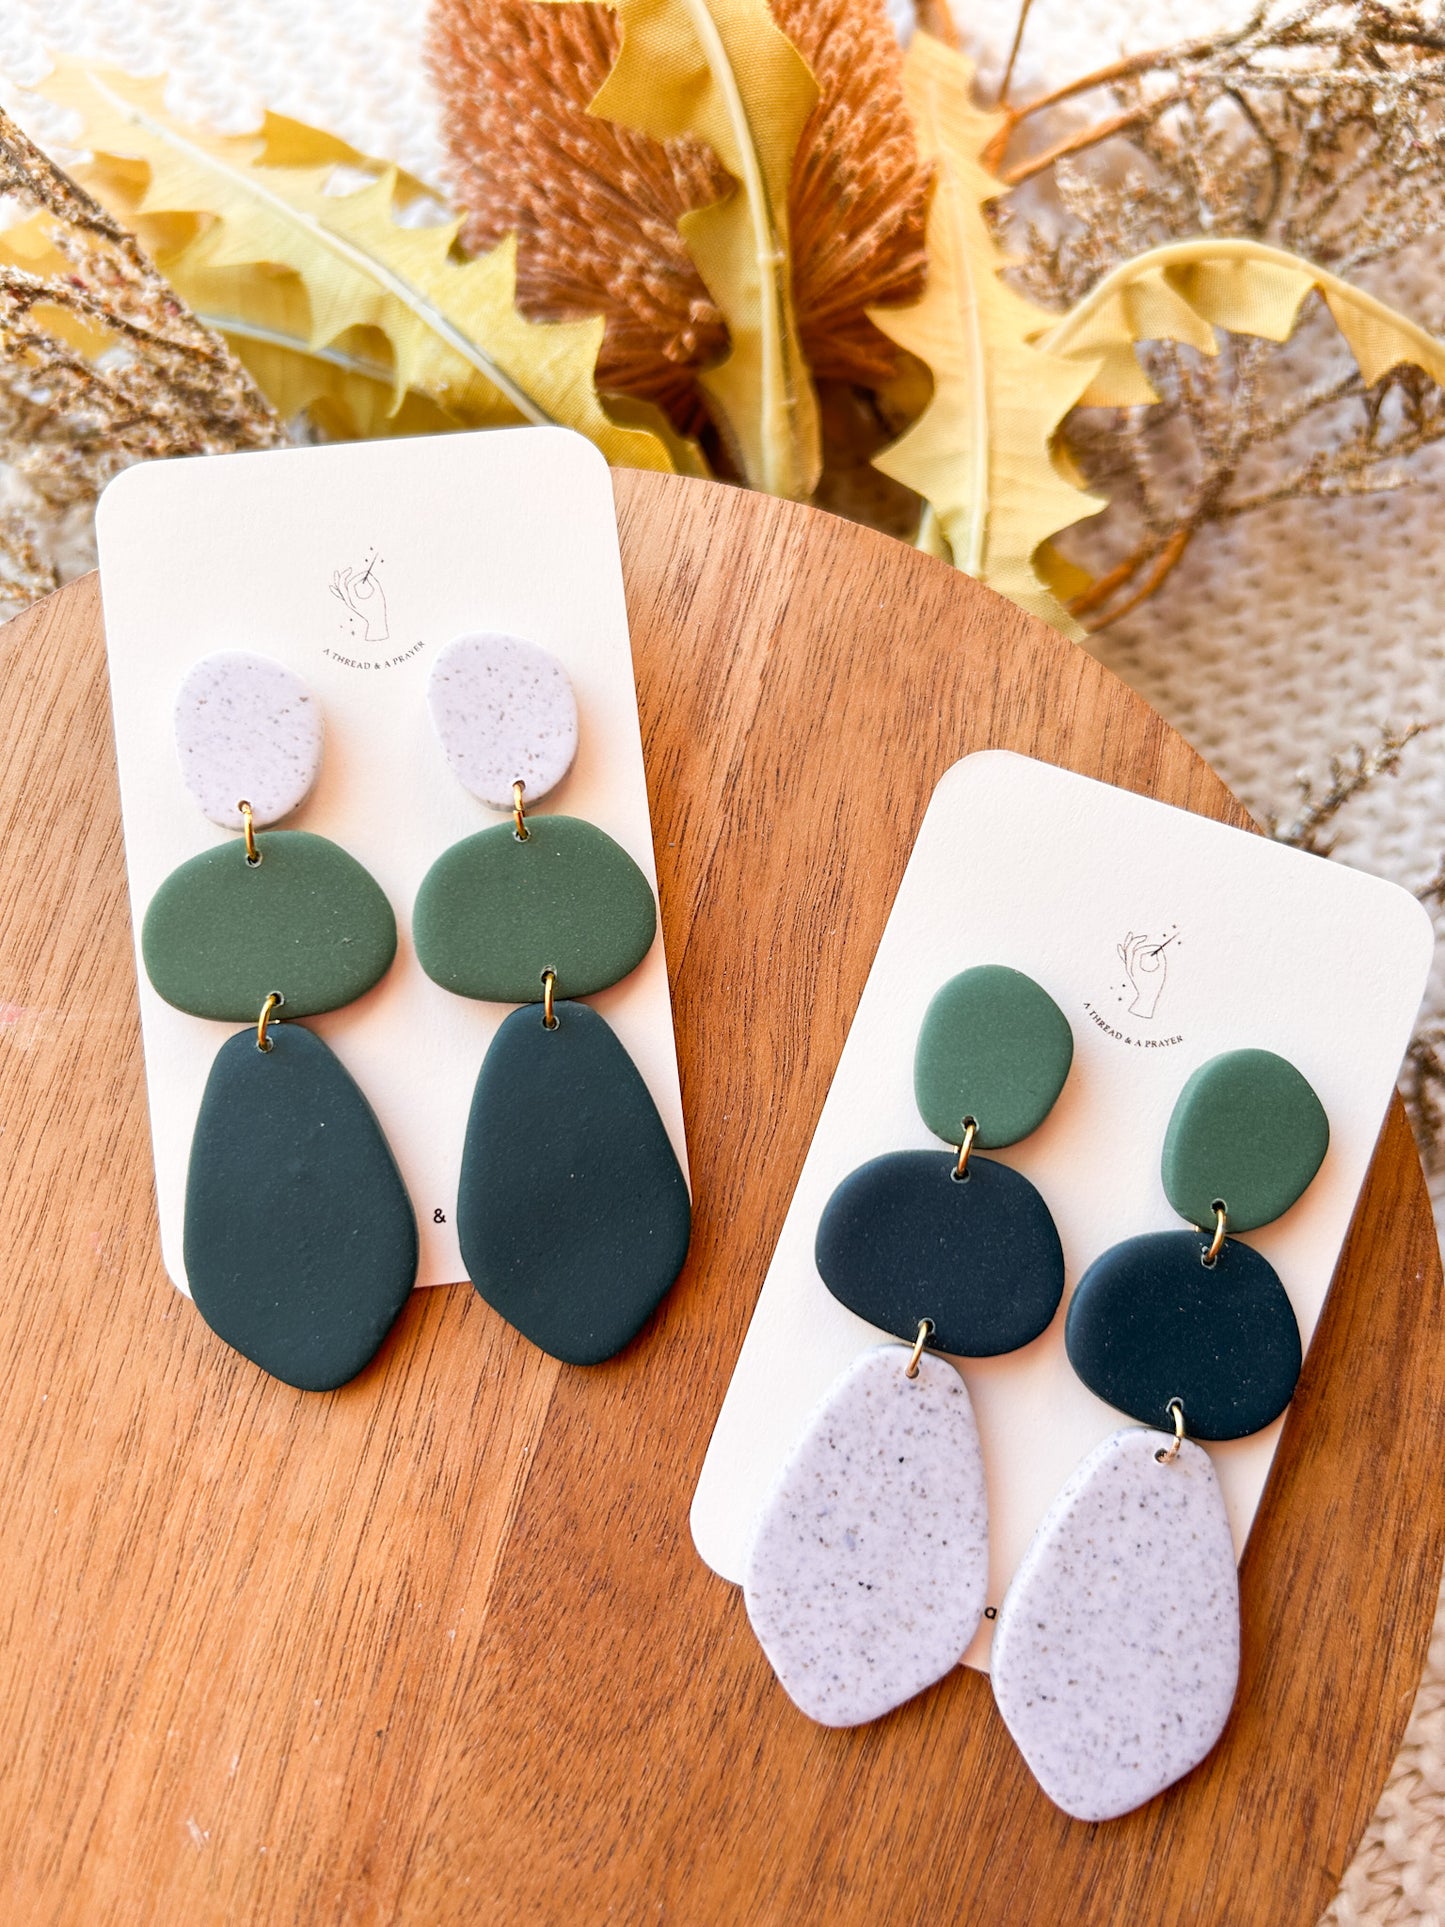 Gorgeous and Green Clay Dangle Polymer Clay Earrings | Winter Fashion | Winter Color Earrings | Statement Earrings | Lightweight